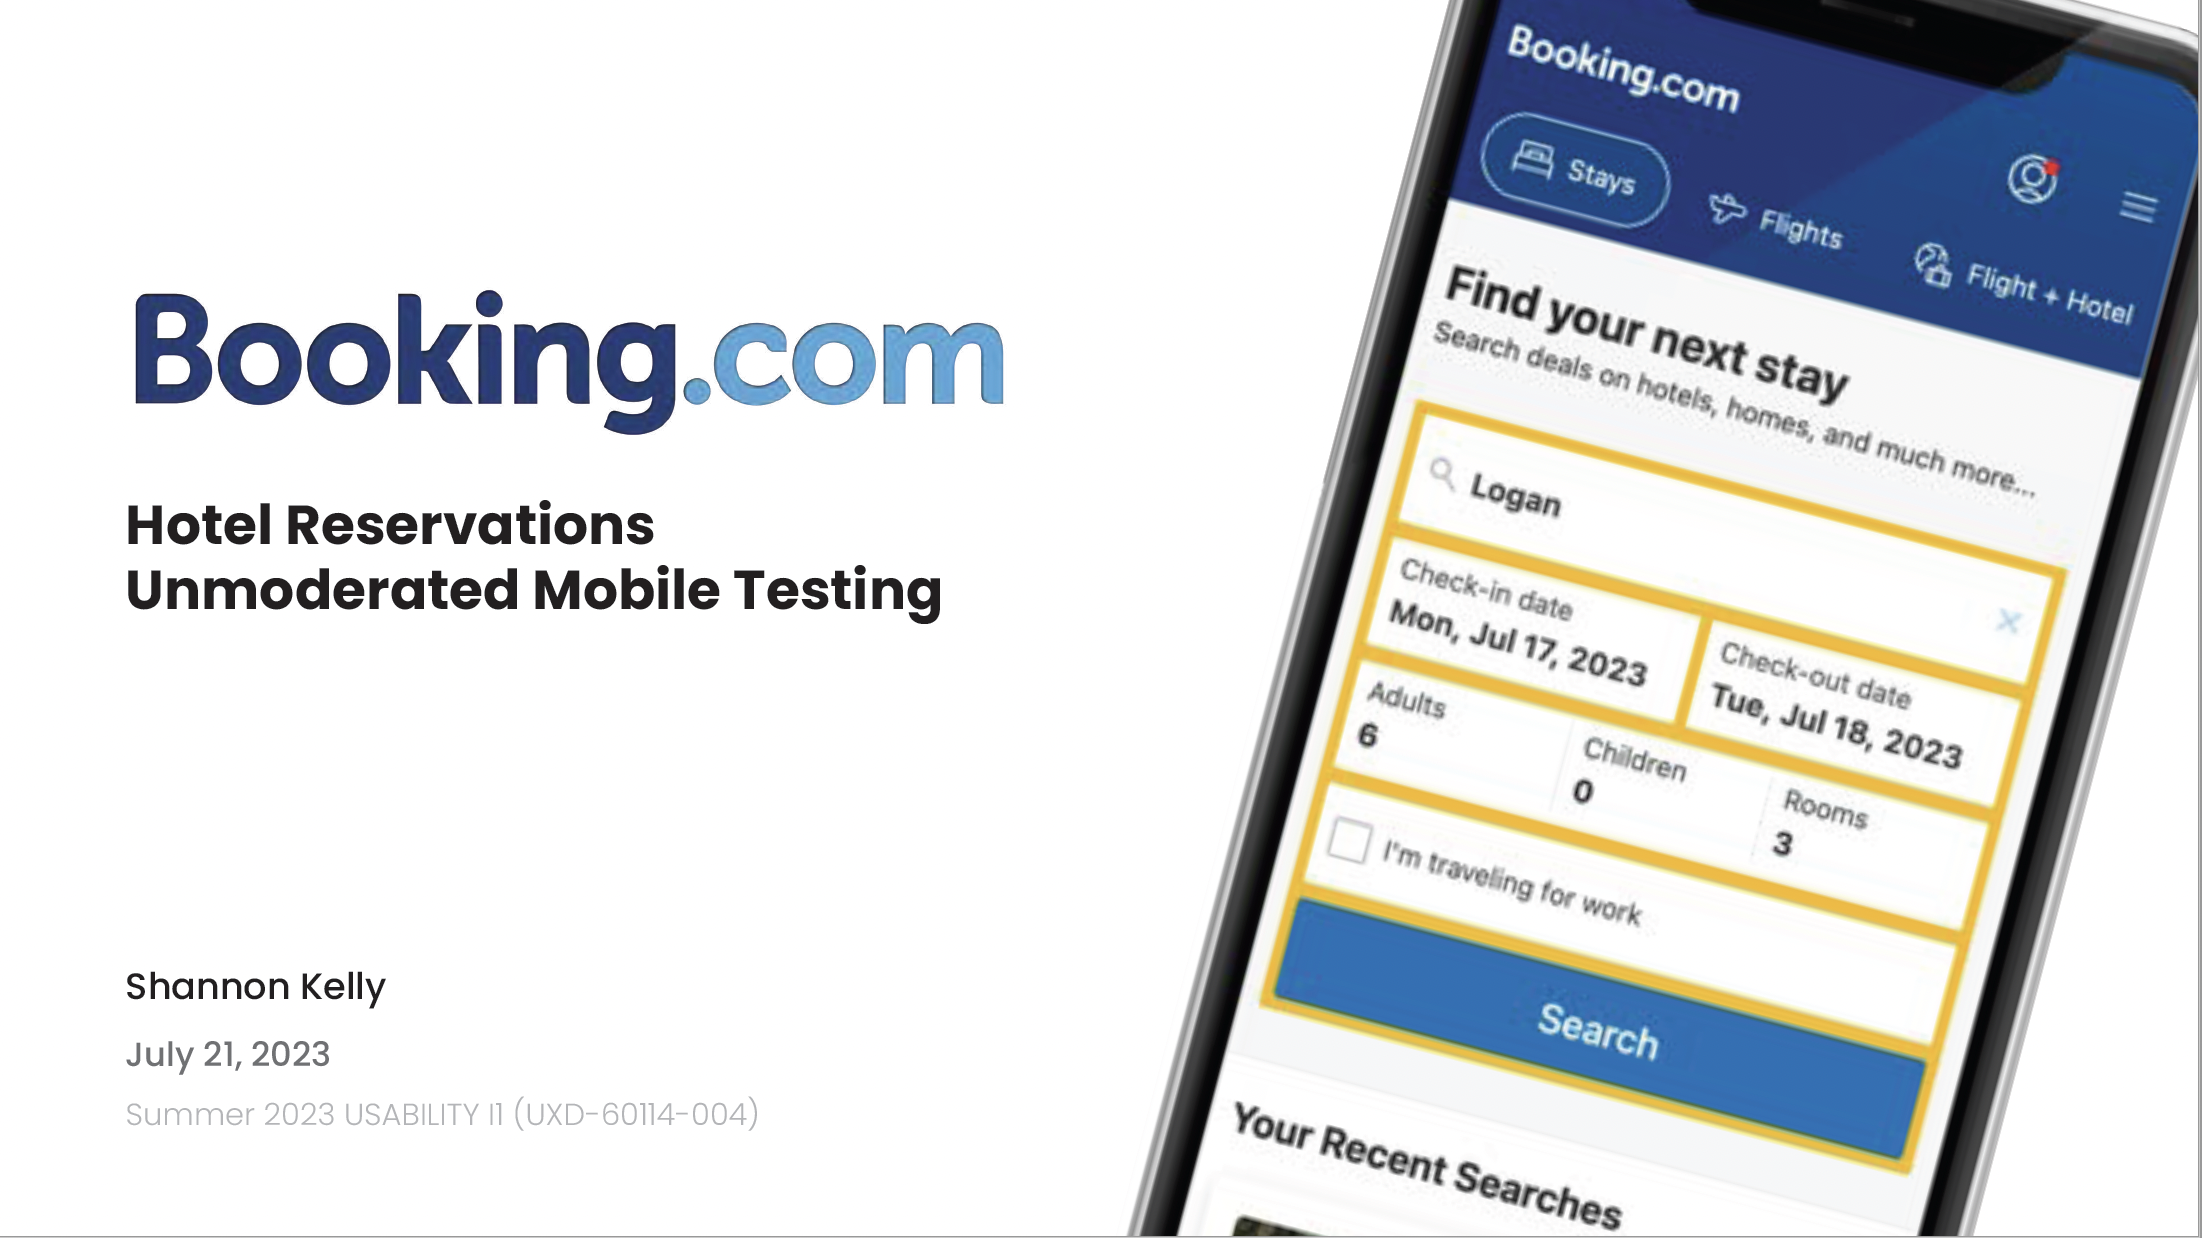 Booking.com Unmoderated Mobile Usability Study